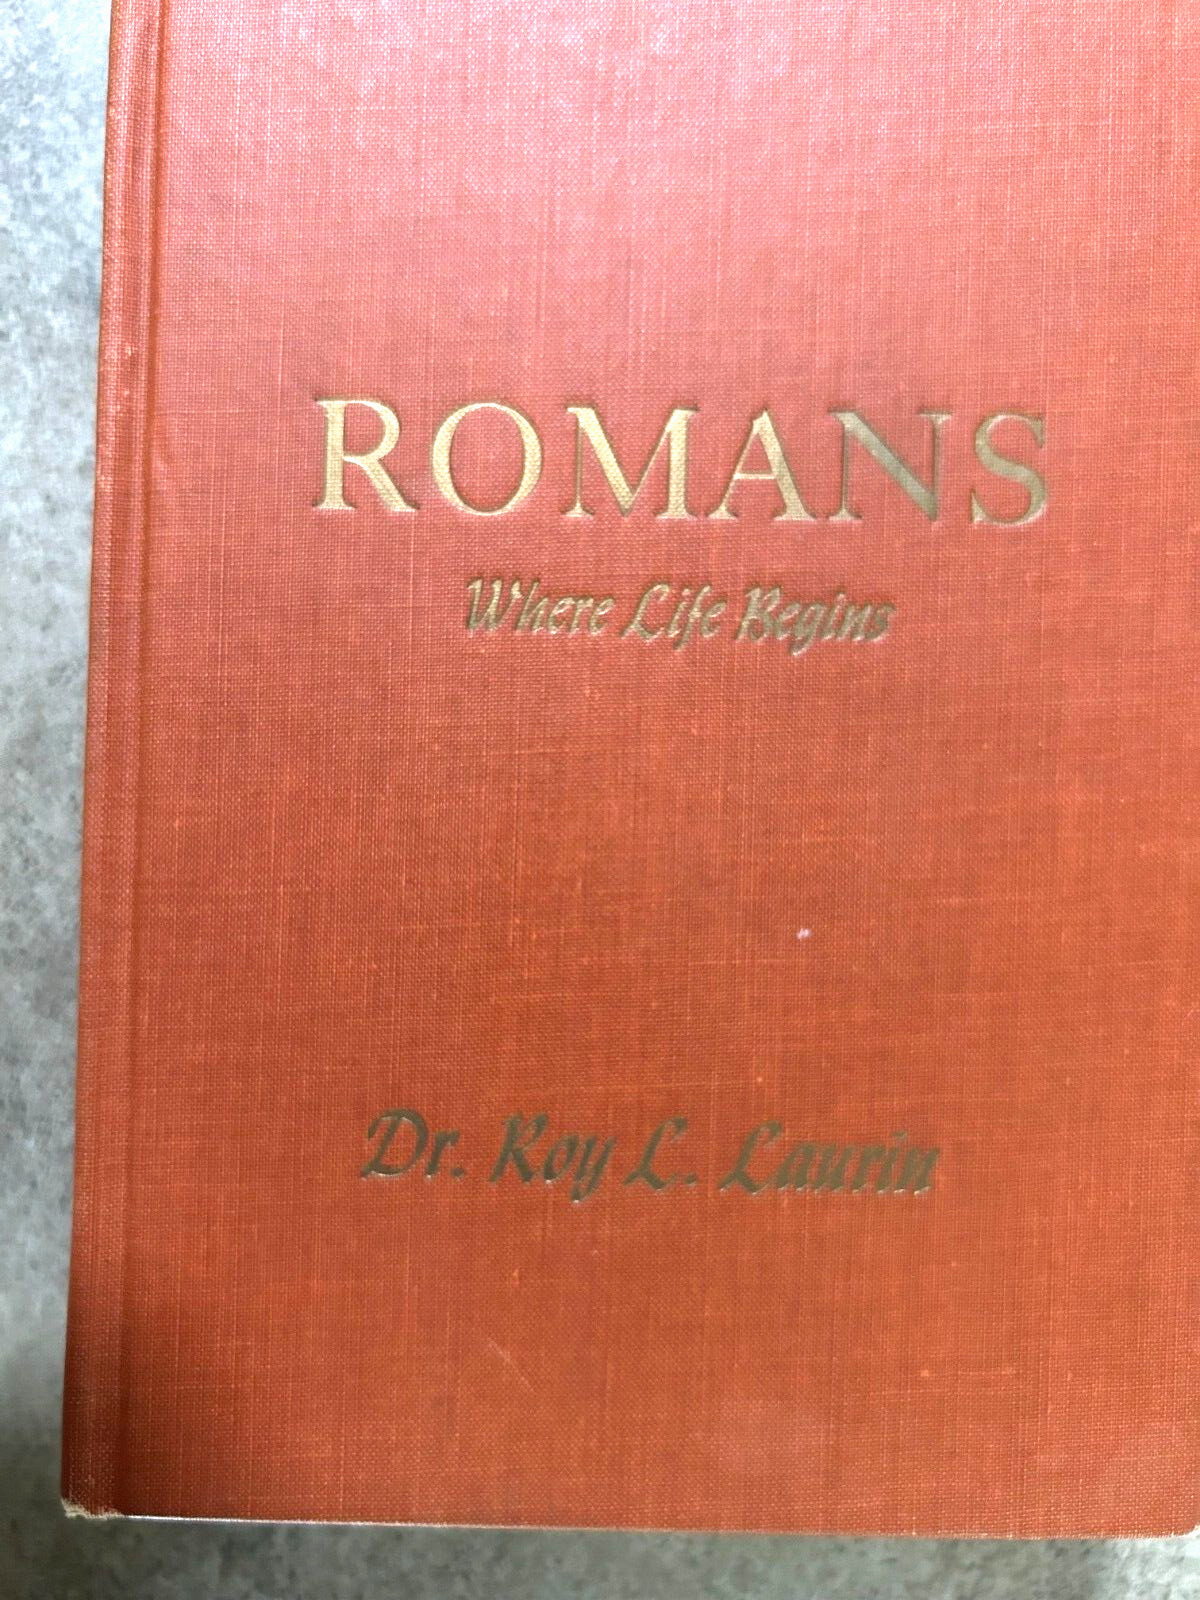 VINTAGE ROMANS WHERE LIFE BEGINS DR. ROY L LAURIN BIBLE COMMENTARY QUICK SHIP